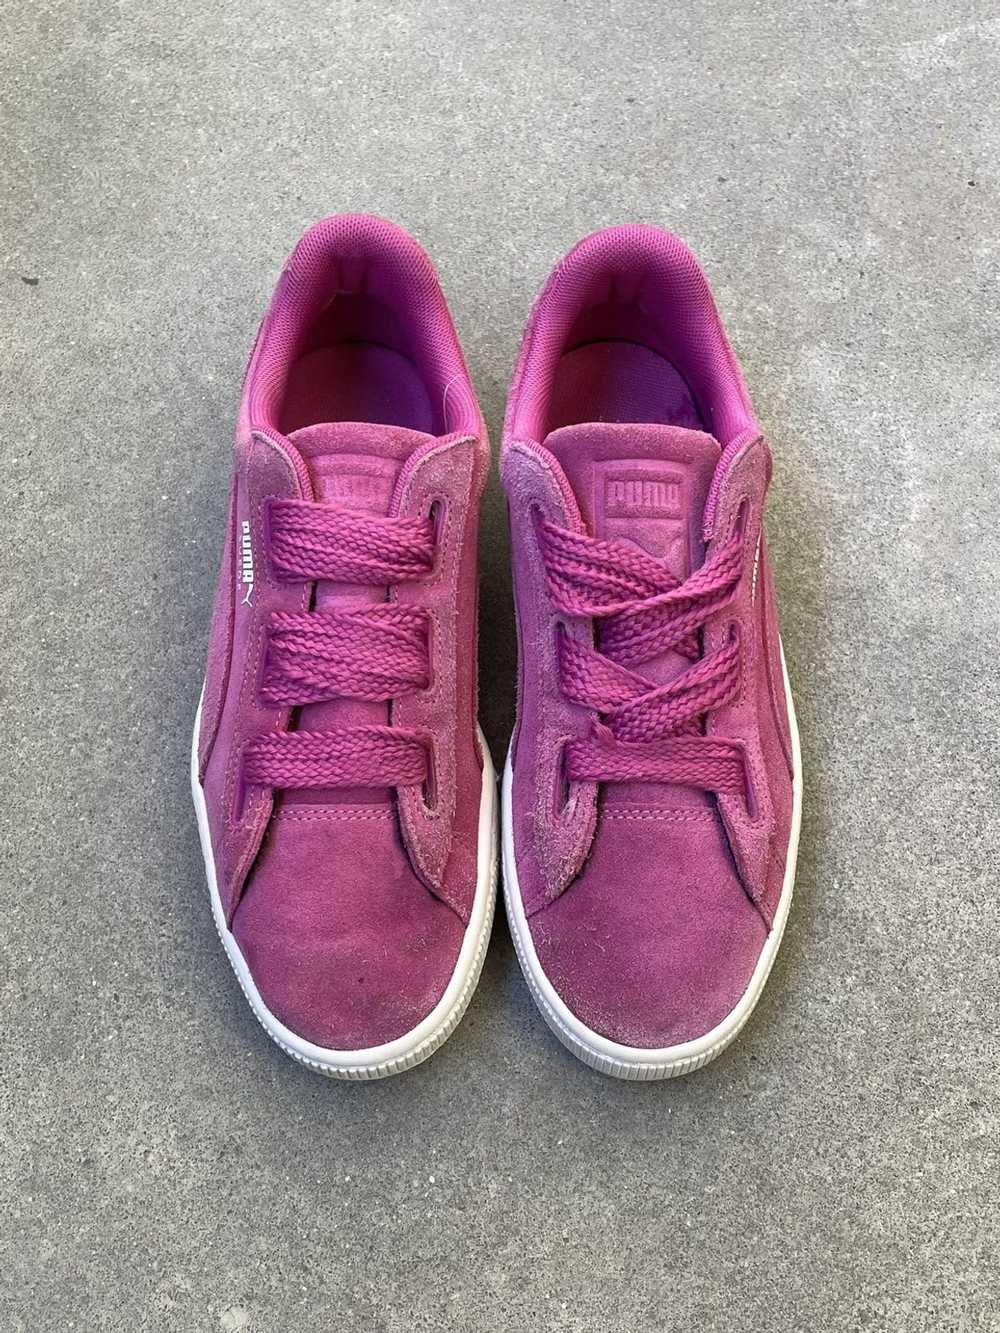 Puma Puma suede classic sneakers pink suede shoes… - image 4